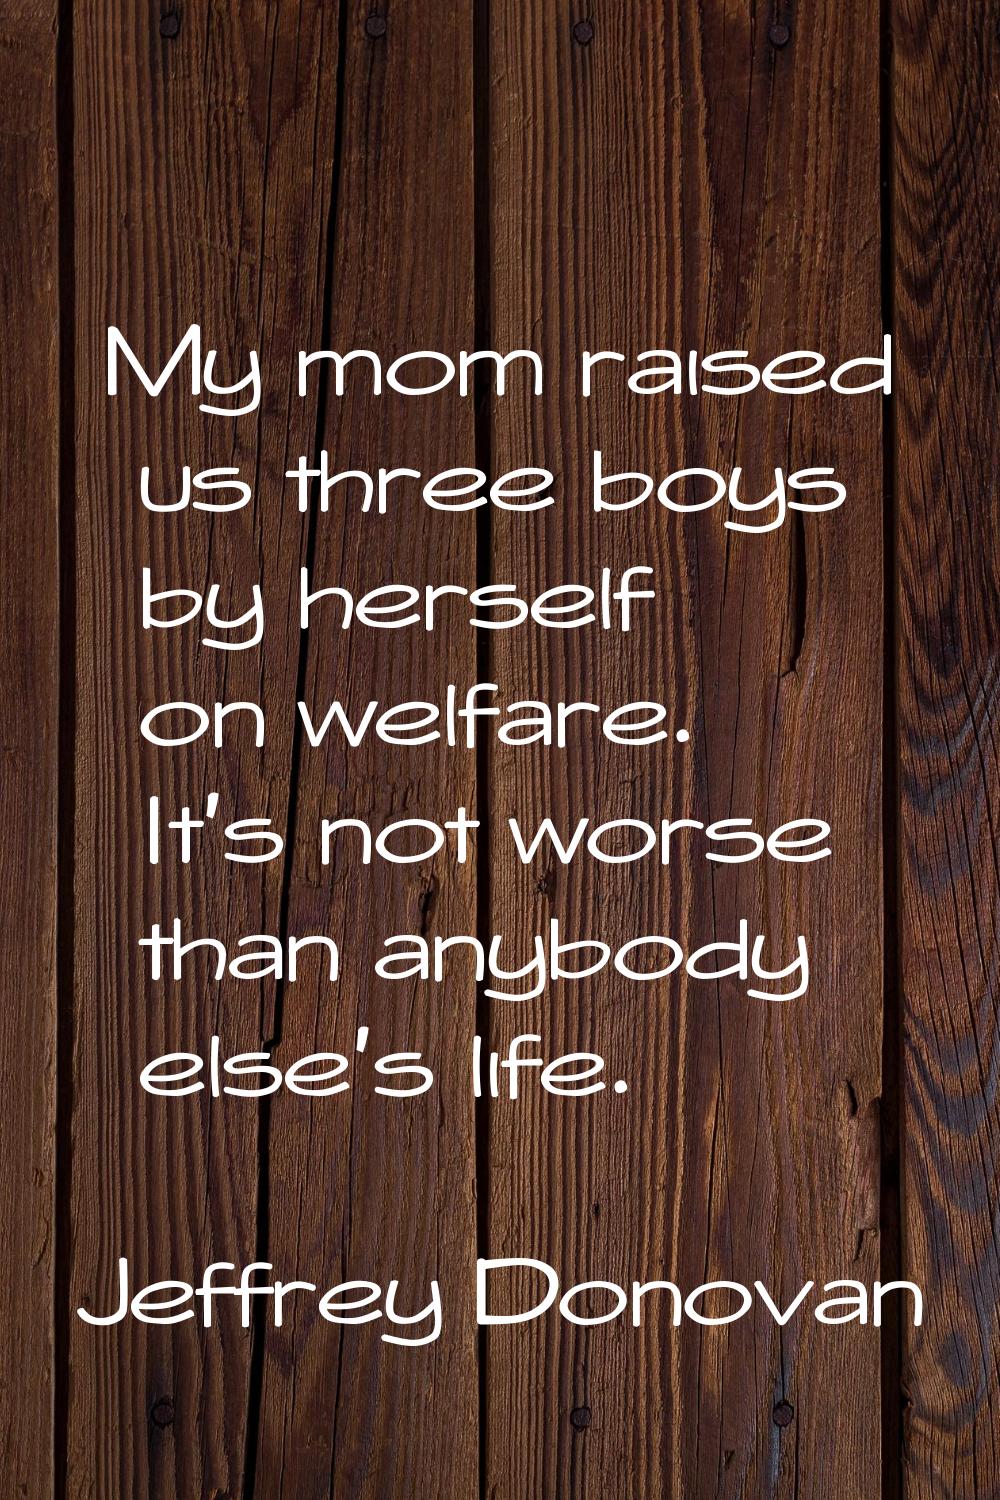 My mom raised us three boys by herself on welfare. It's not worse than anybody else's life.